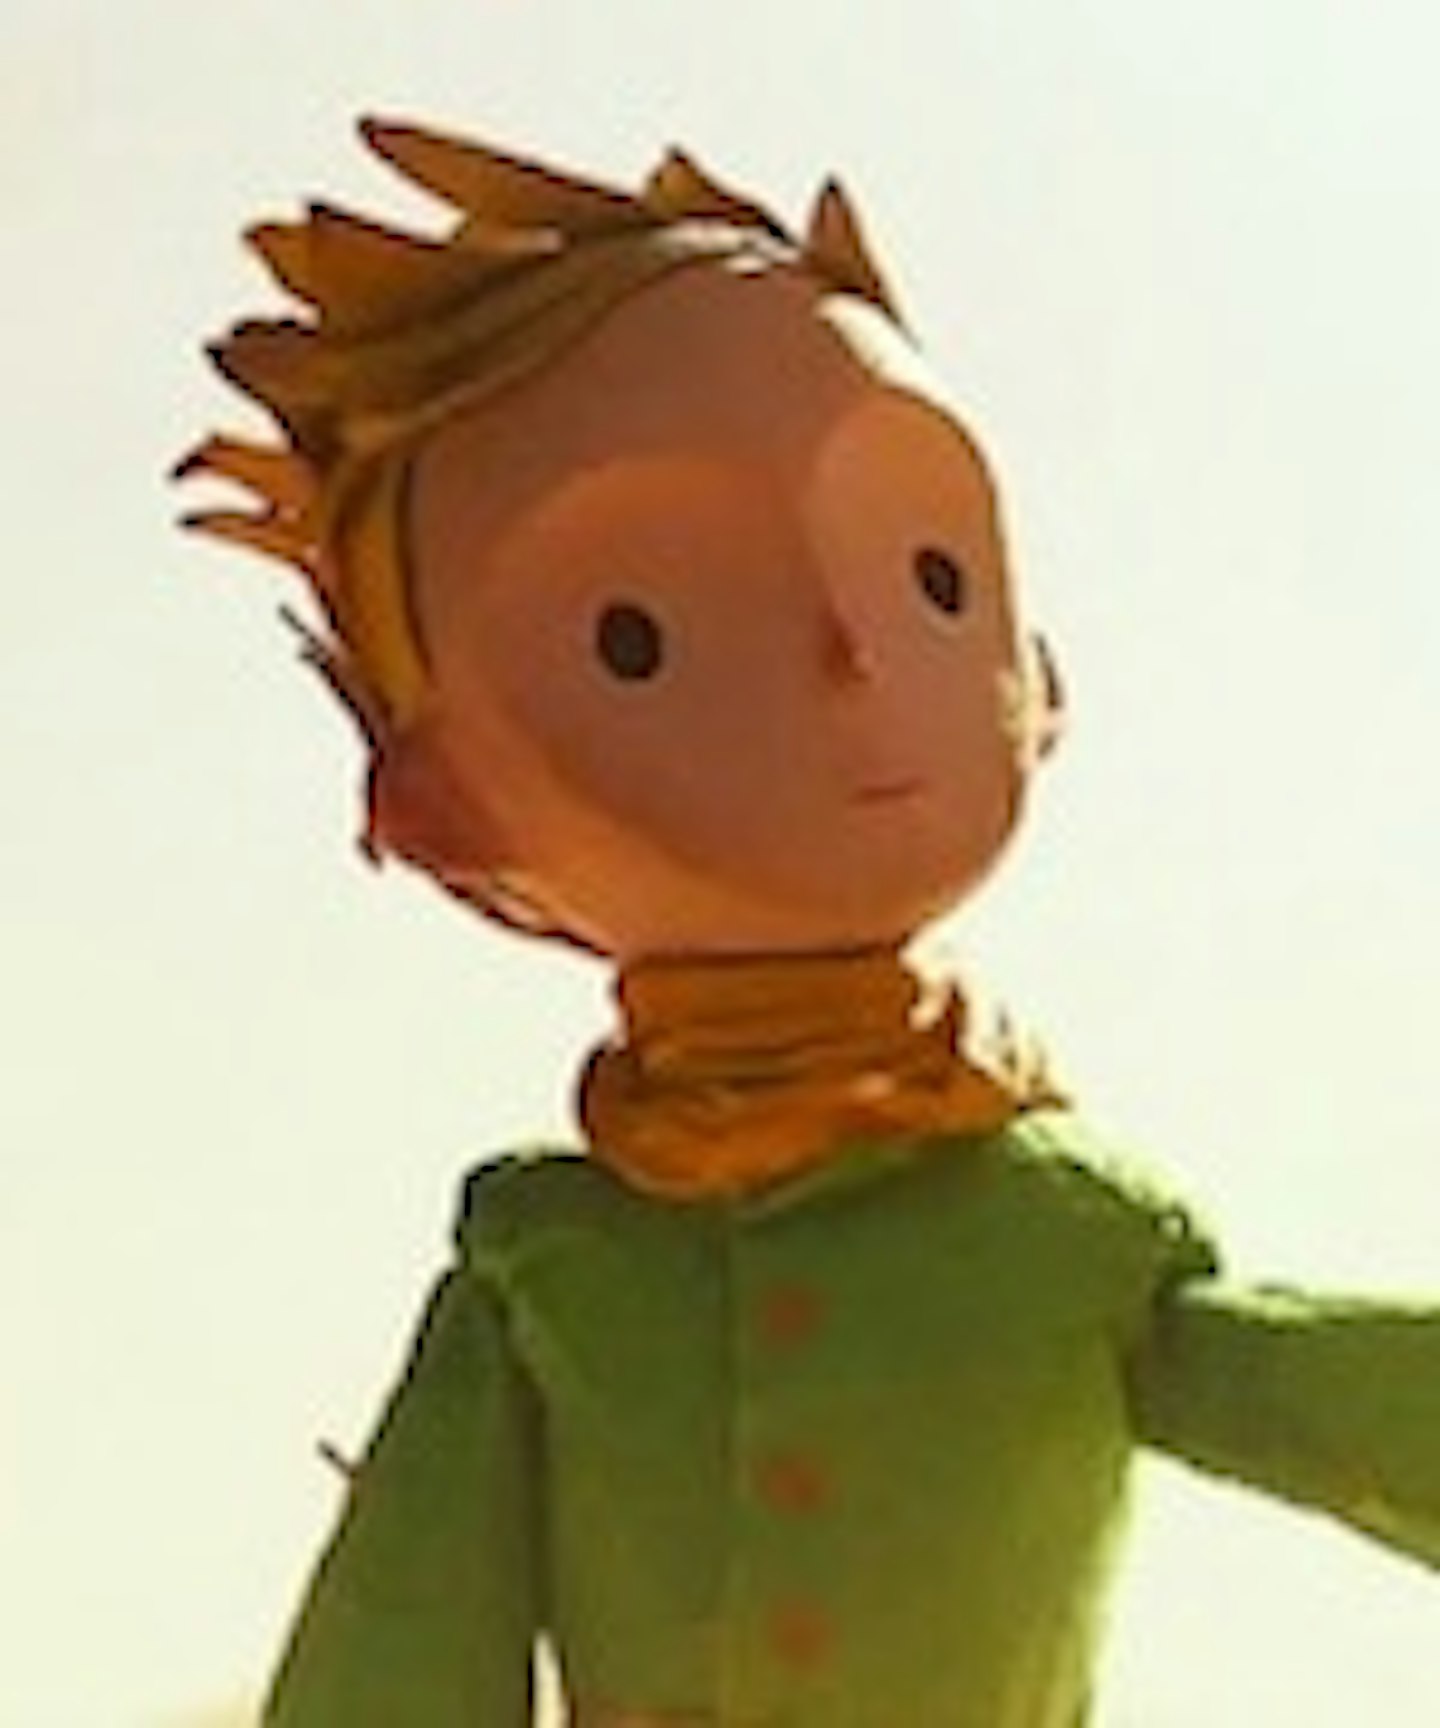 Trailer For The Little Prince Flies Online, Movies